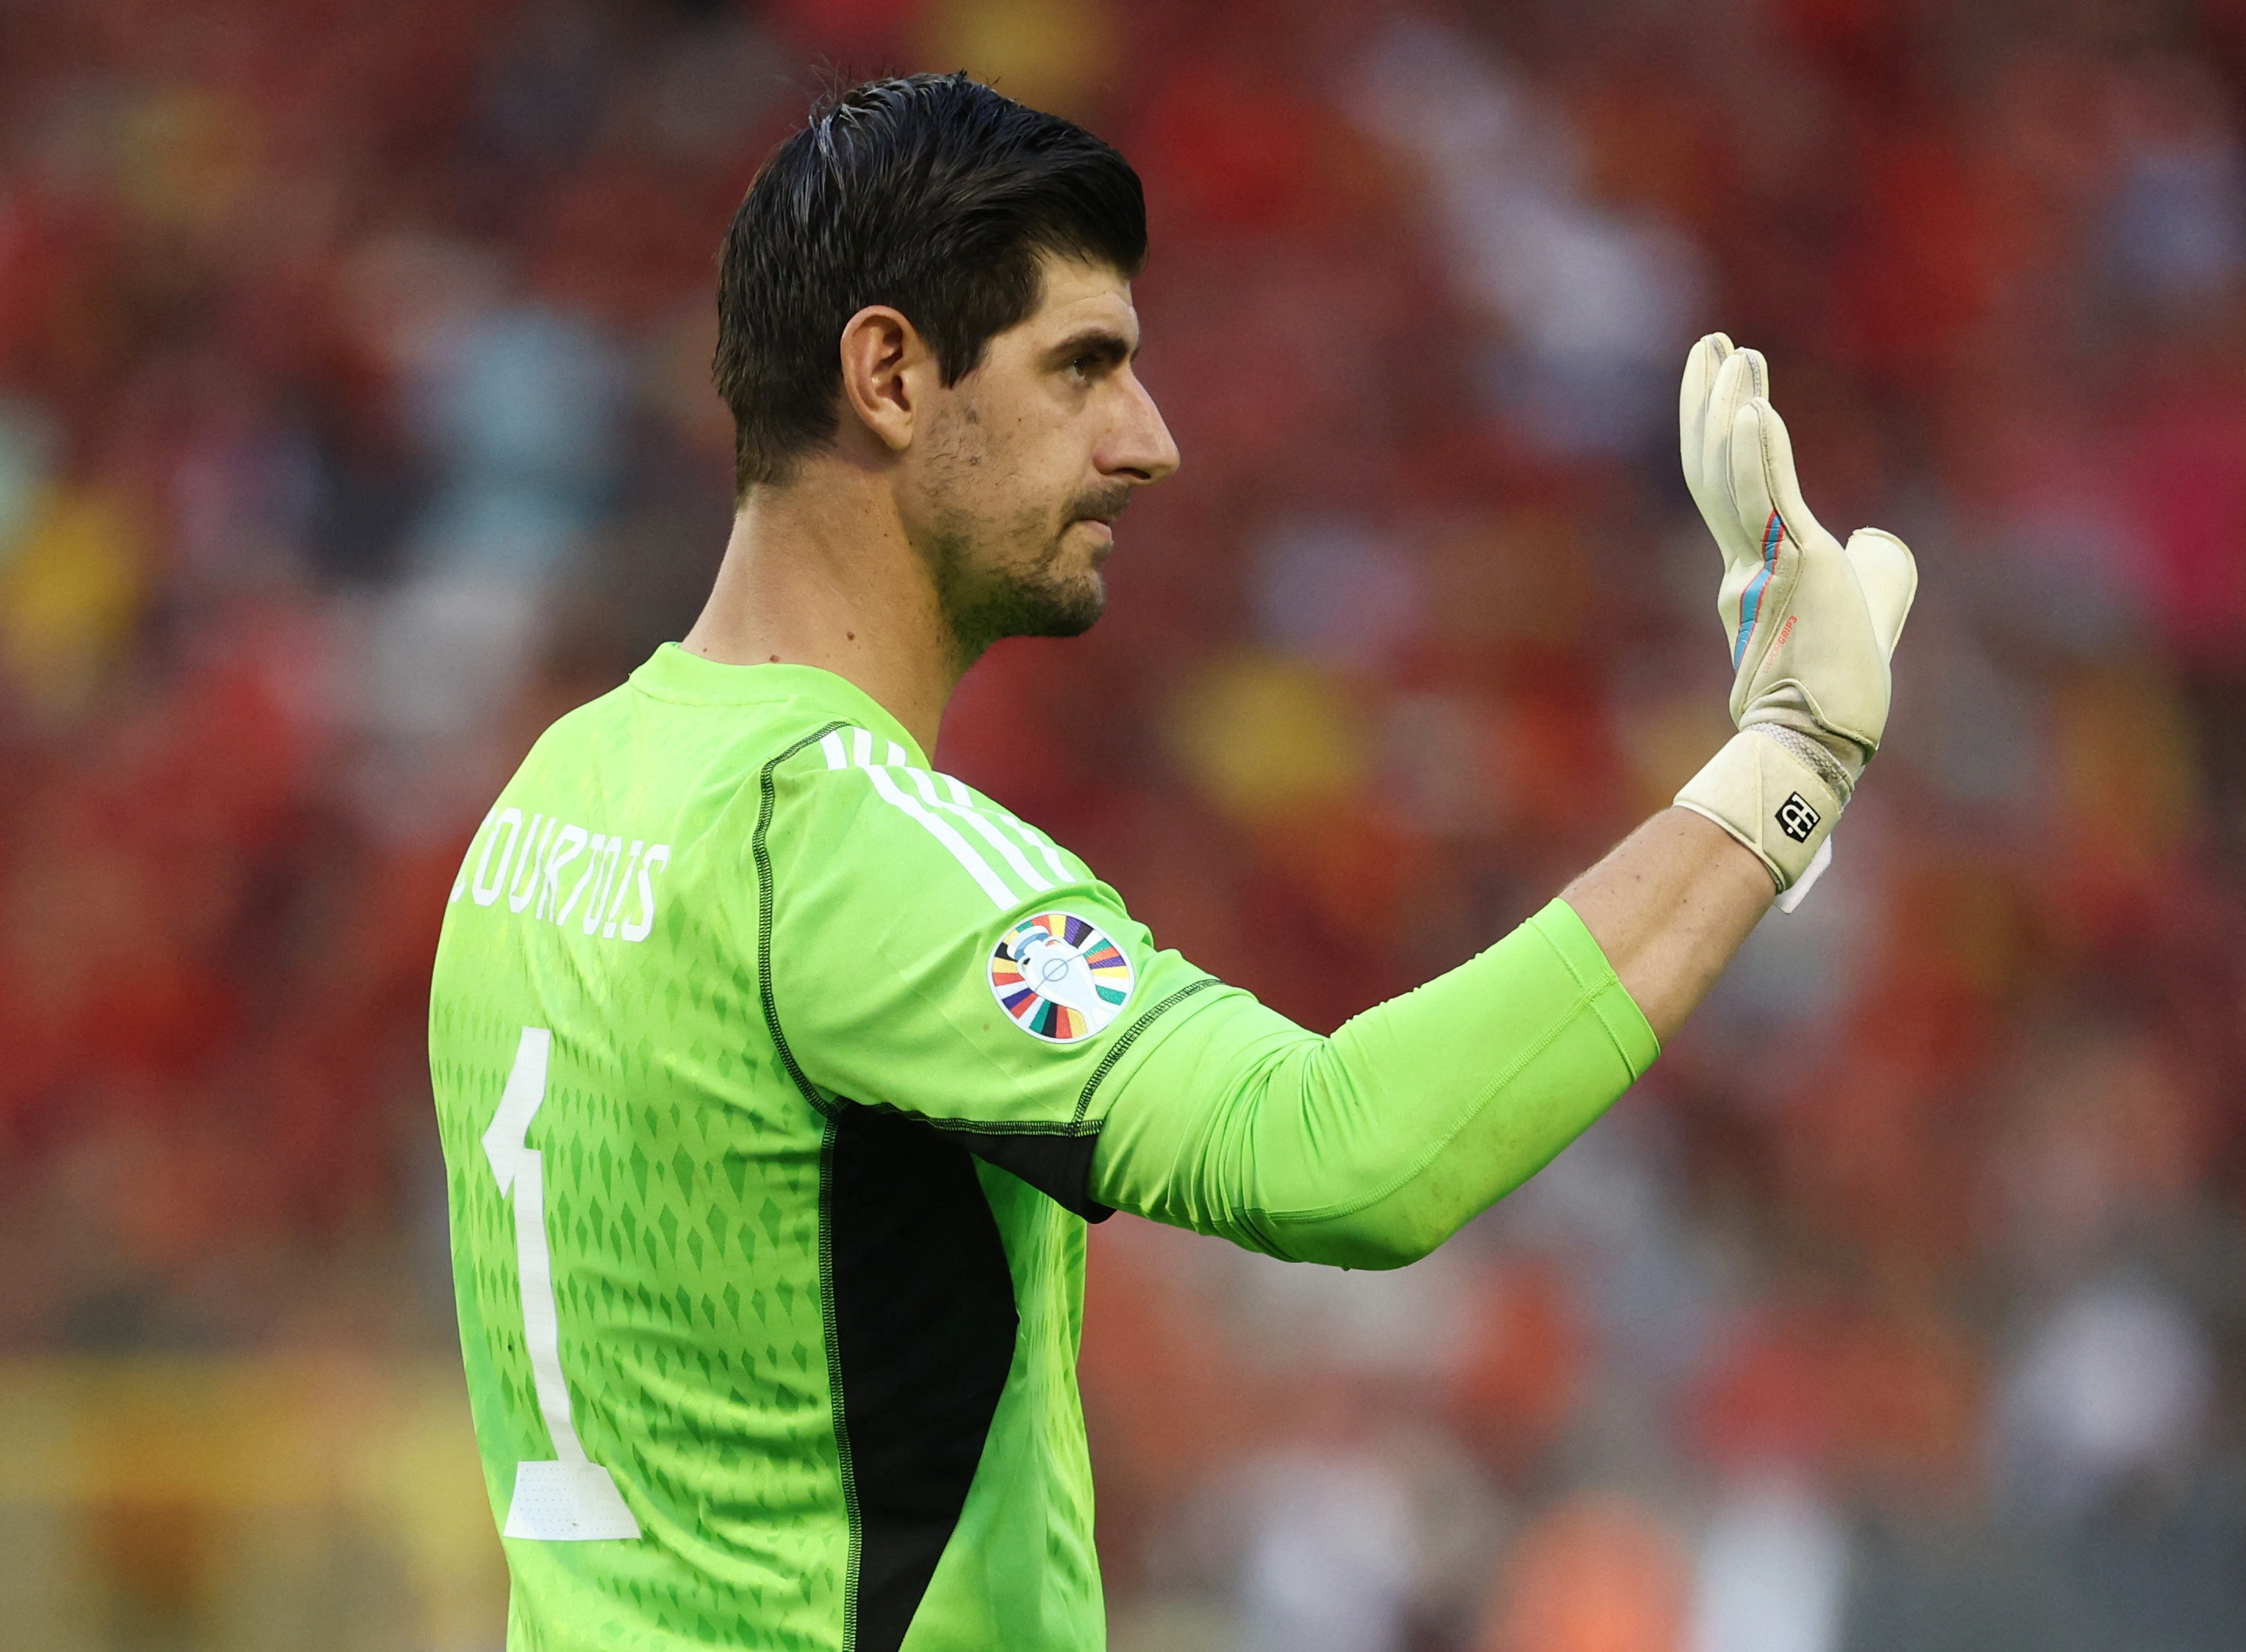 Belgium's Courtois 'deeply disappointed' by Tedesco's remarks